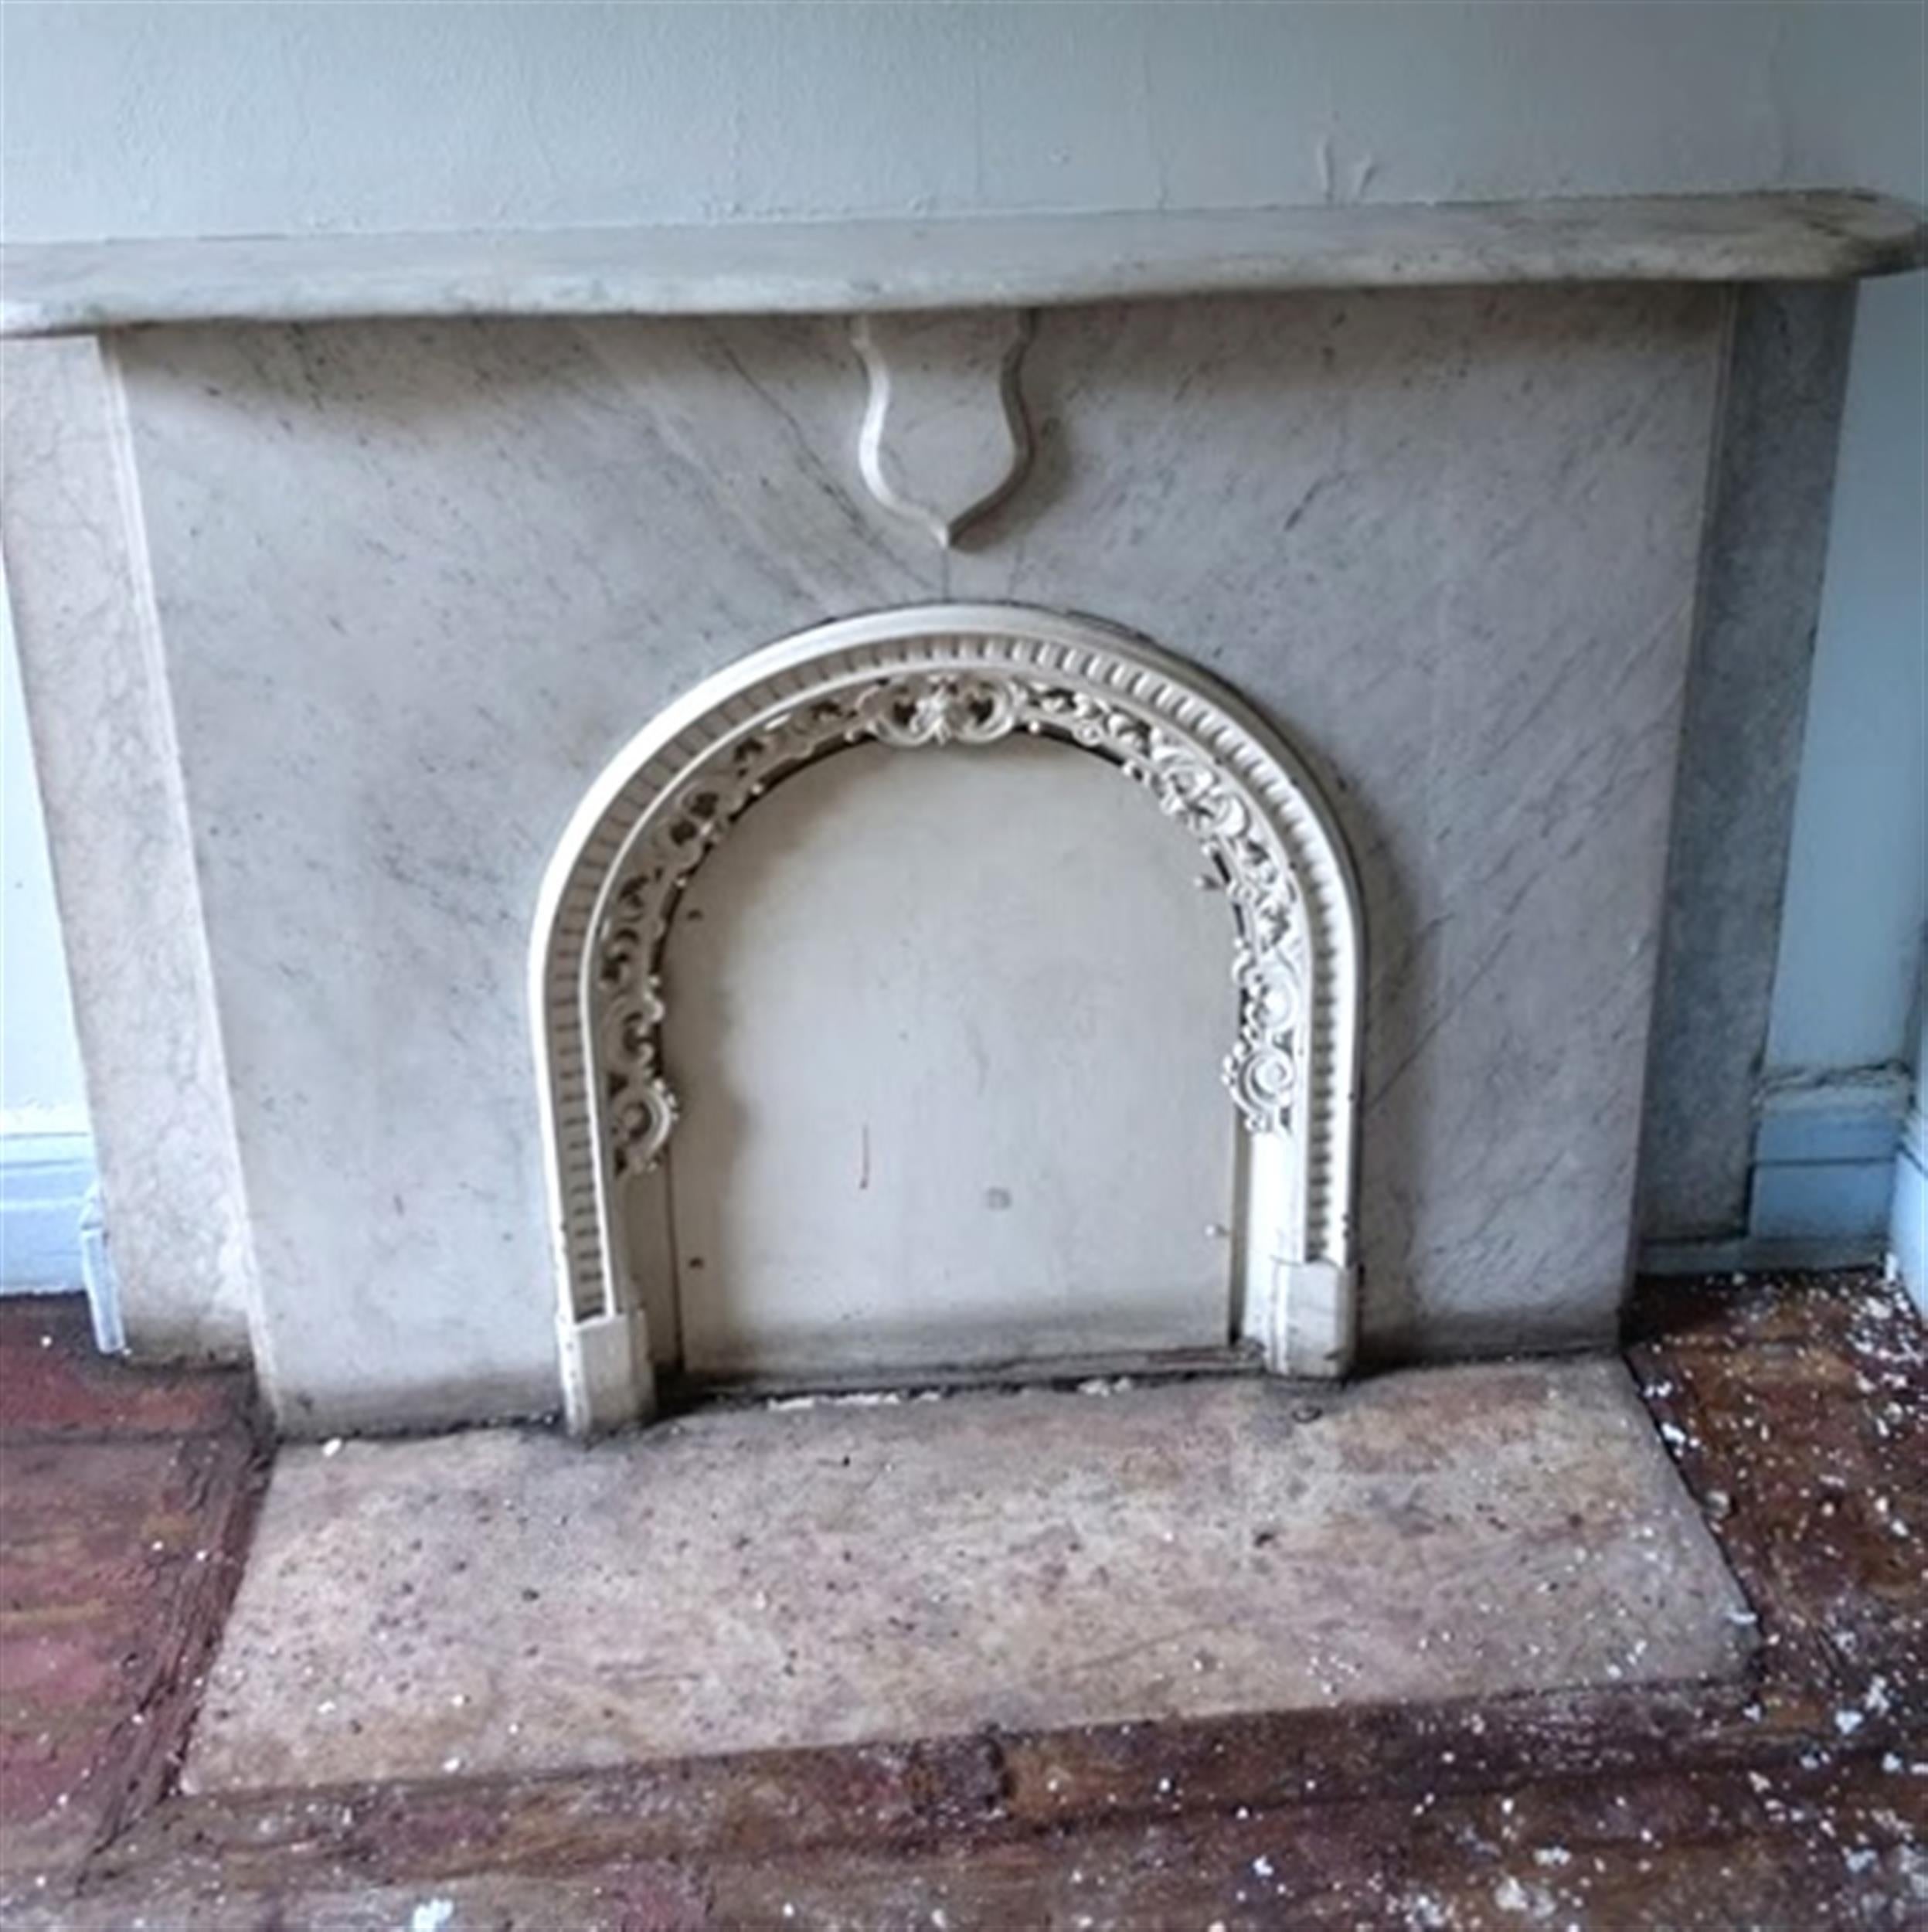 1900s white and gray veined carved Carrara marble mantel with flat face and flat shield keystone. It is pictured here in its original New York City brownstone home. This mantel comes with the ornate cast iron insert edge, but not the face of the